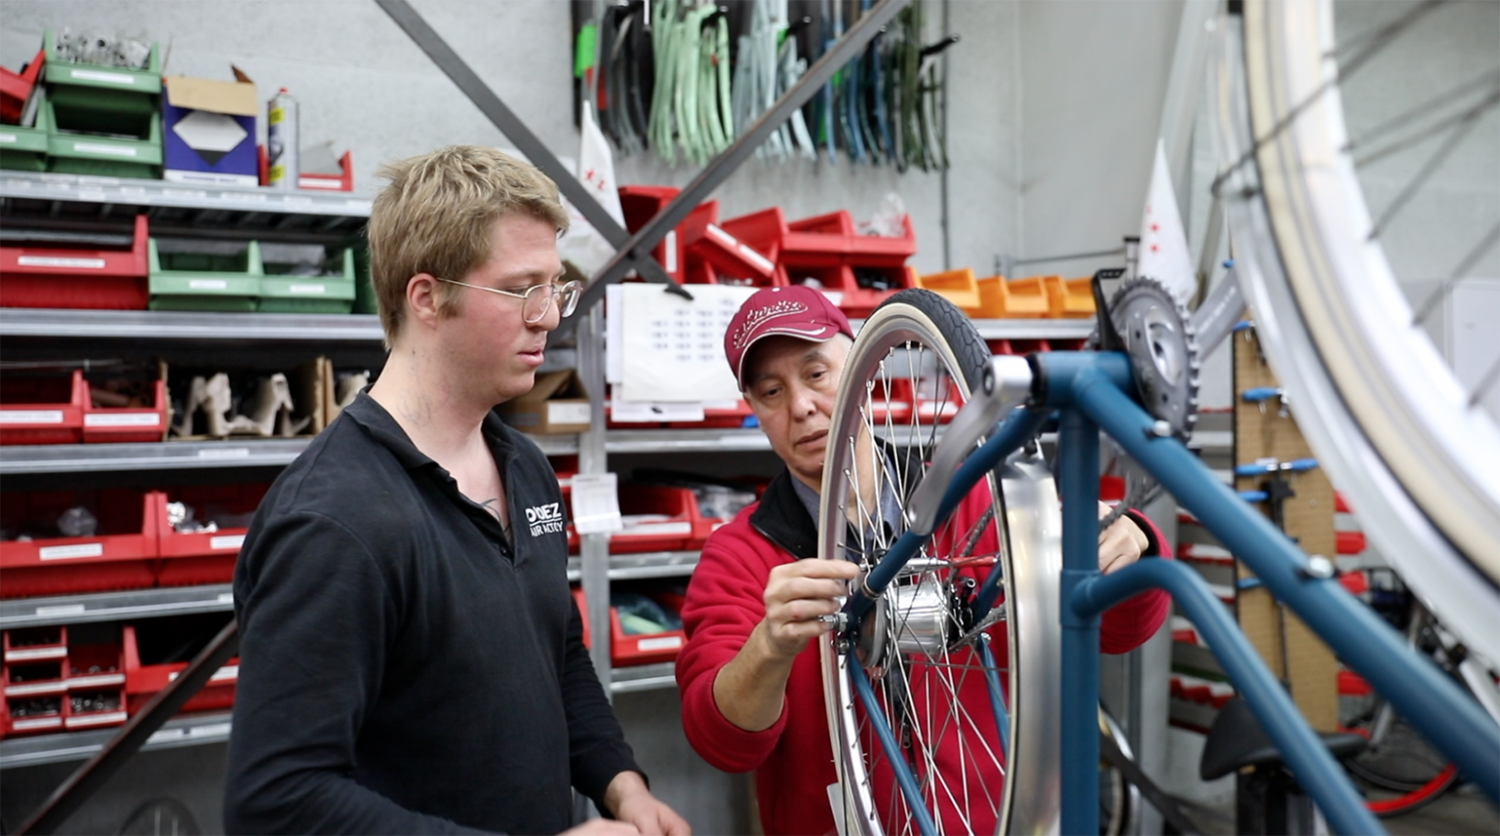 you learn all sorts of aspects of making a bike. Employees gain an allround knowledge of making  bikes.